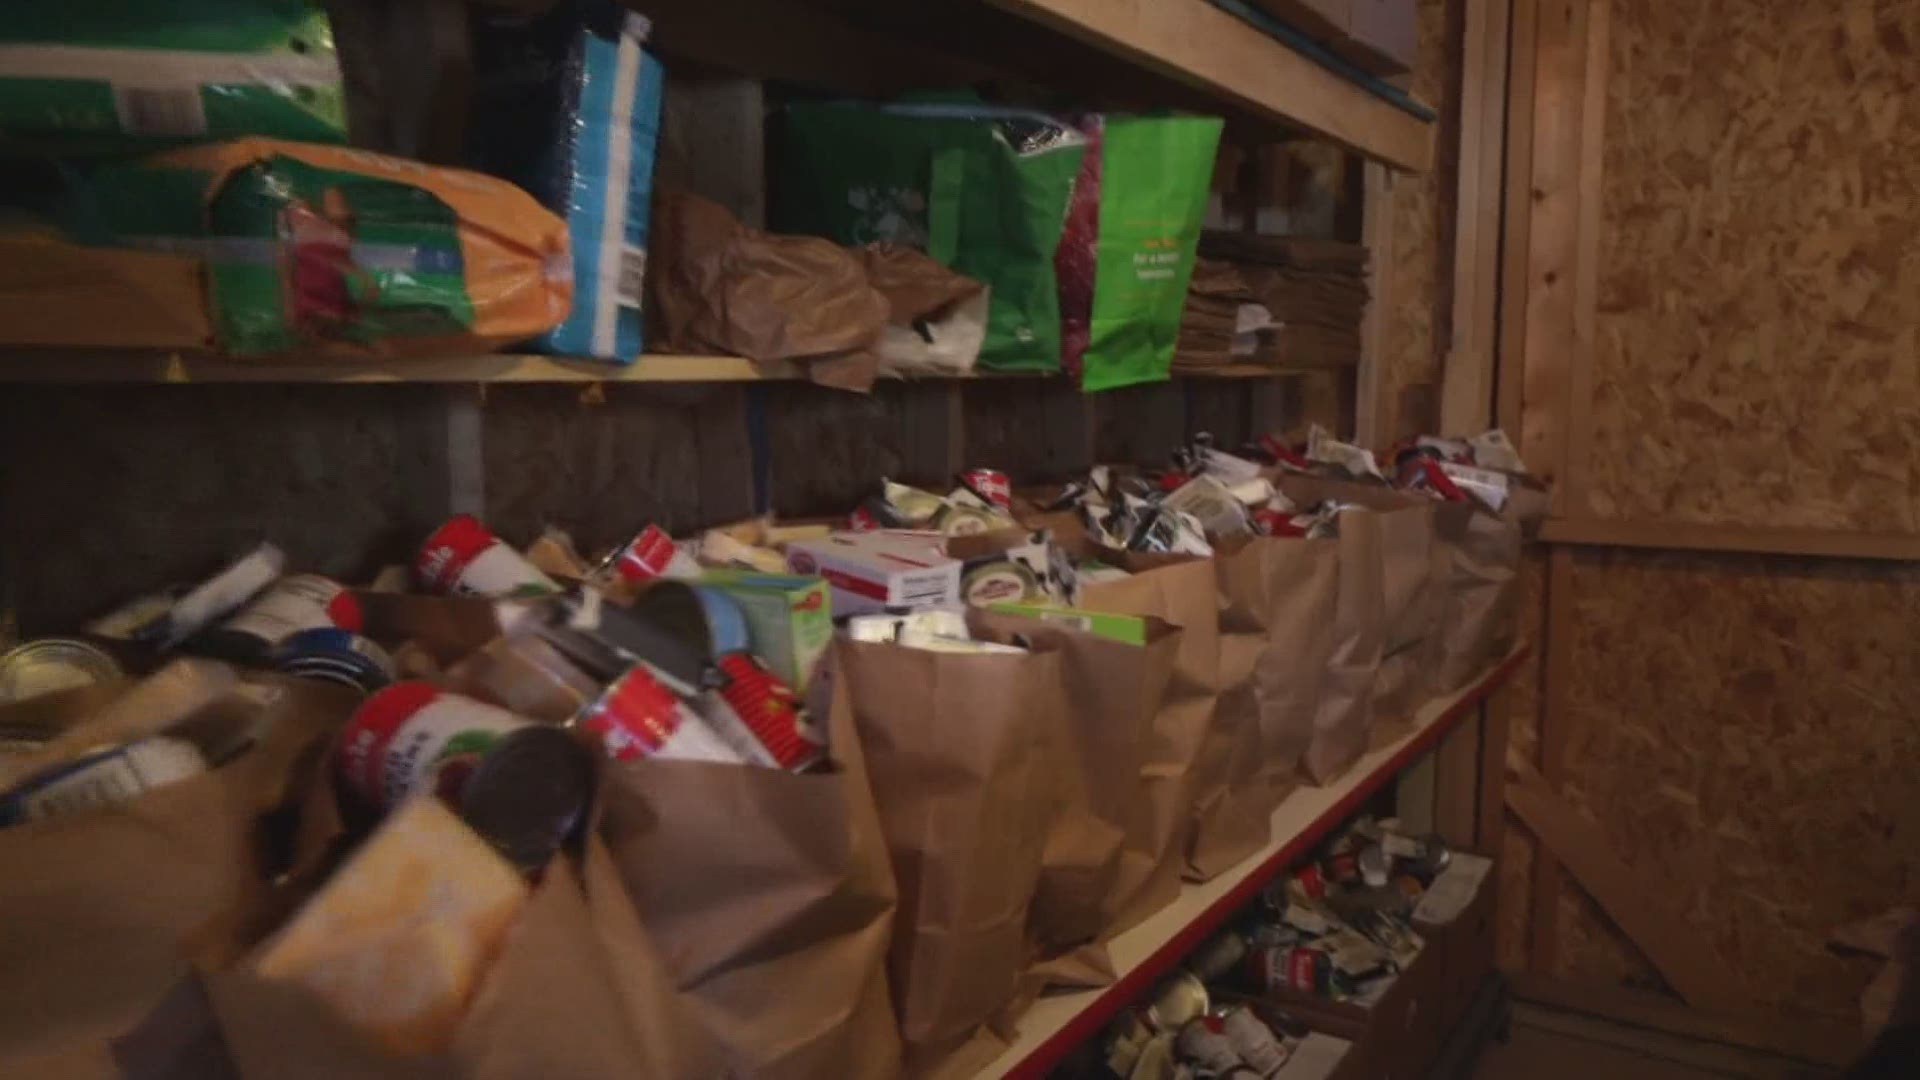 The Burlington Food Pantry is a small panty in Penobscot County in need of a new home.